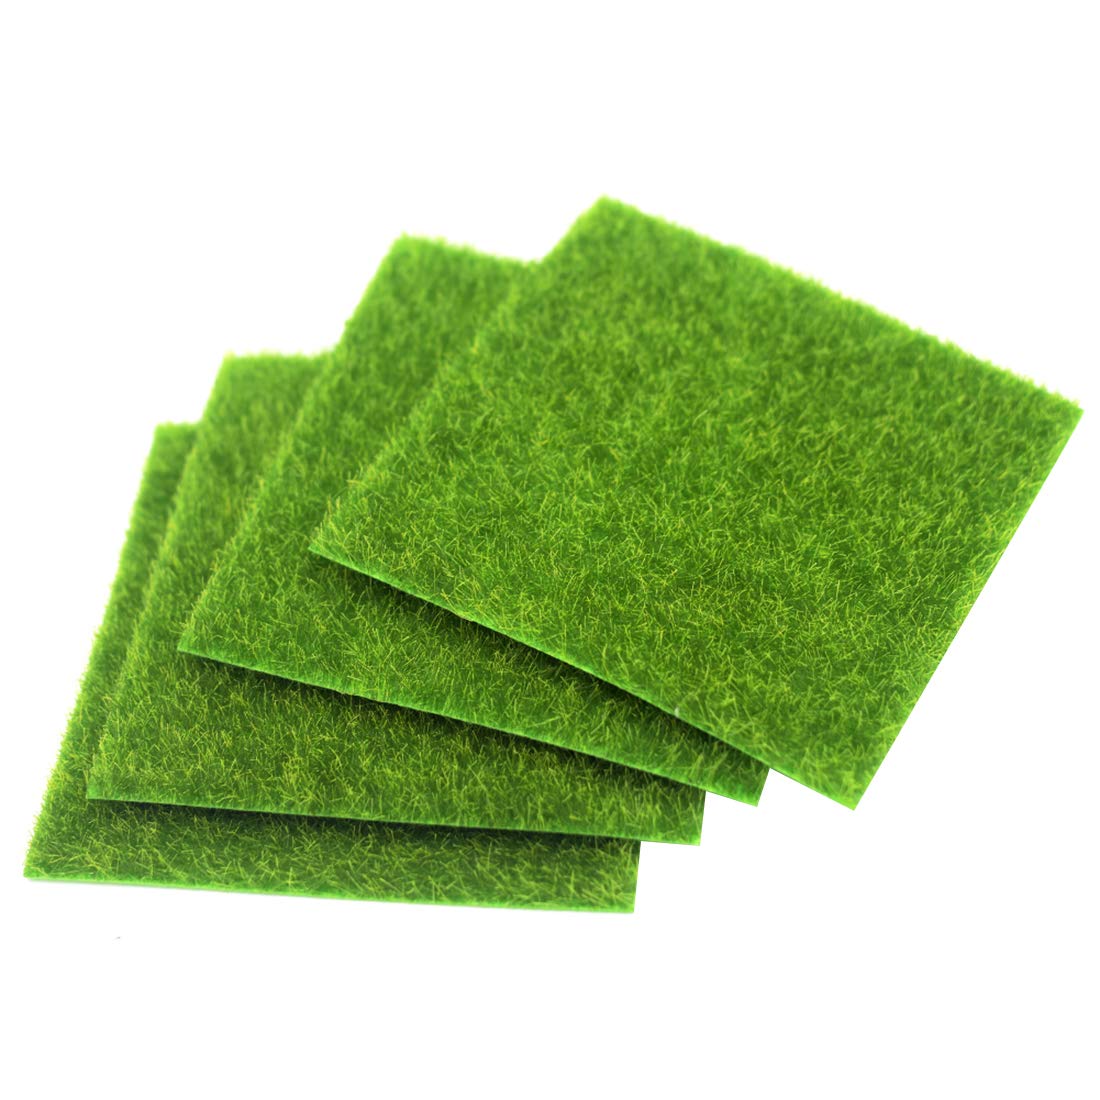 DecorOne Artificial Green Grass for Projects Powder (30gm), Light Green for  Craft, School Project, Art project, Science Project, College Project, Lawn  Fake - Artificial Green Grass for Projects Powder (30gm), Light Green